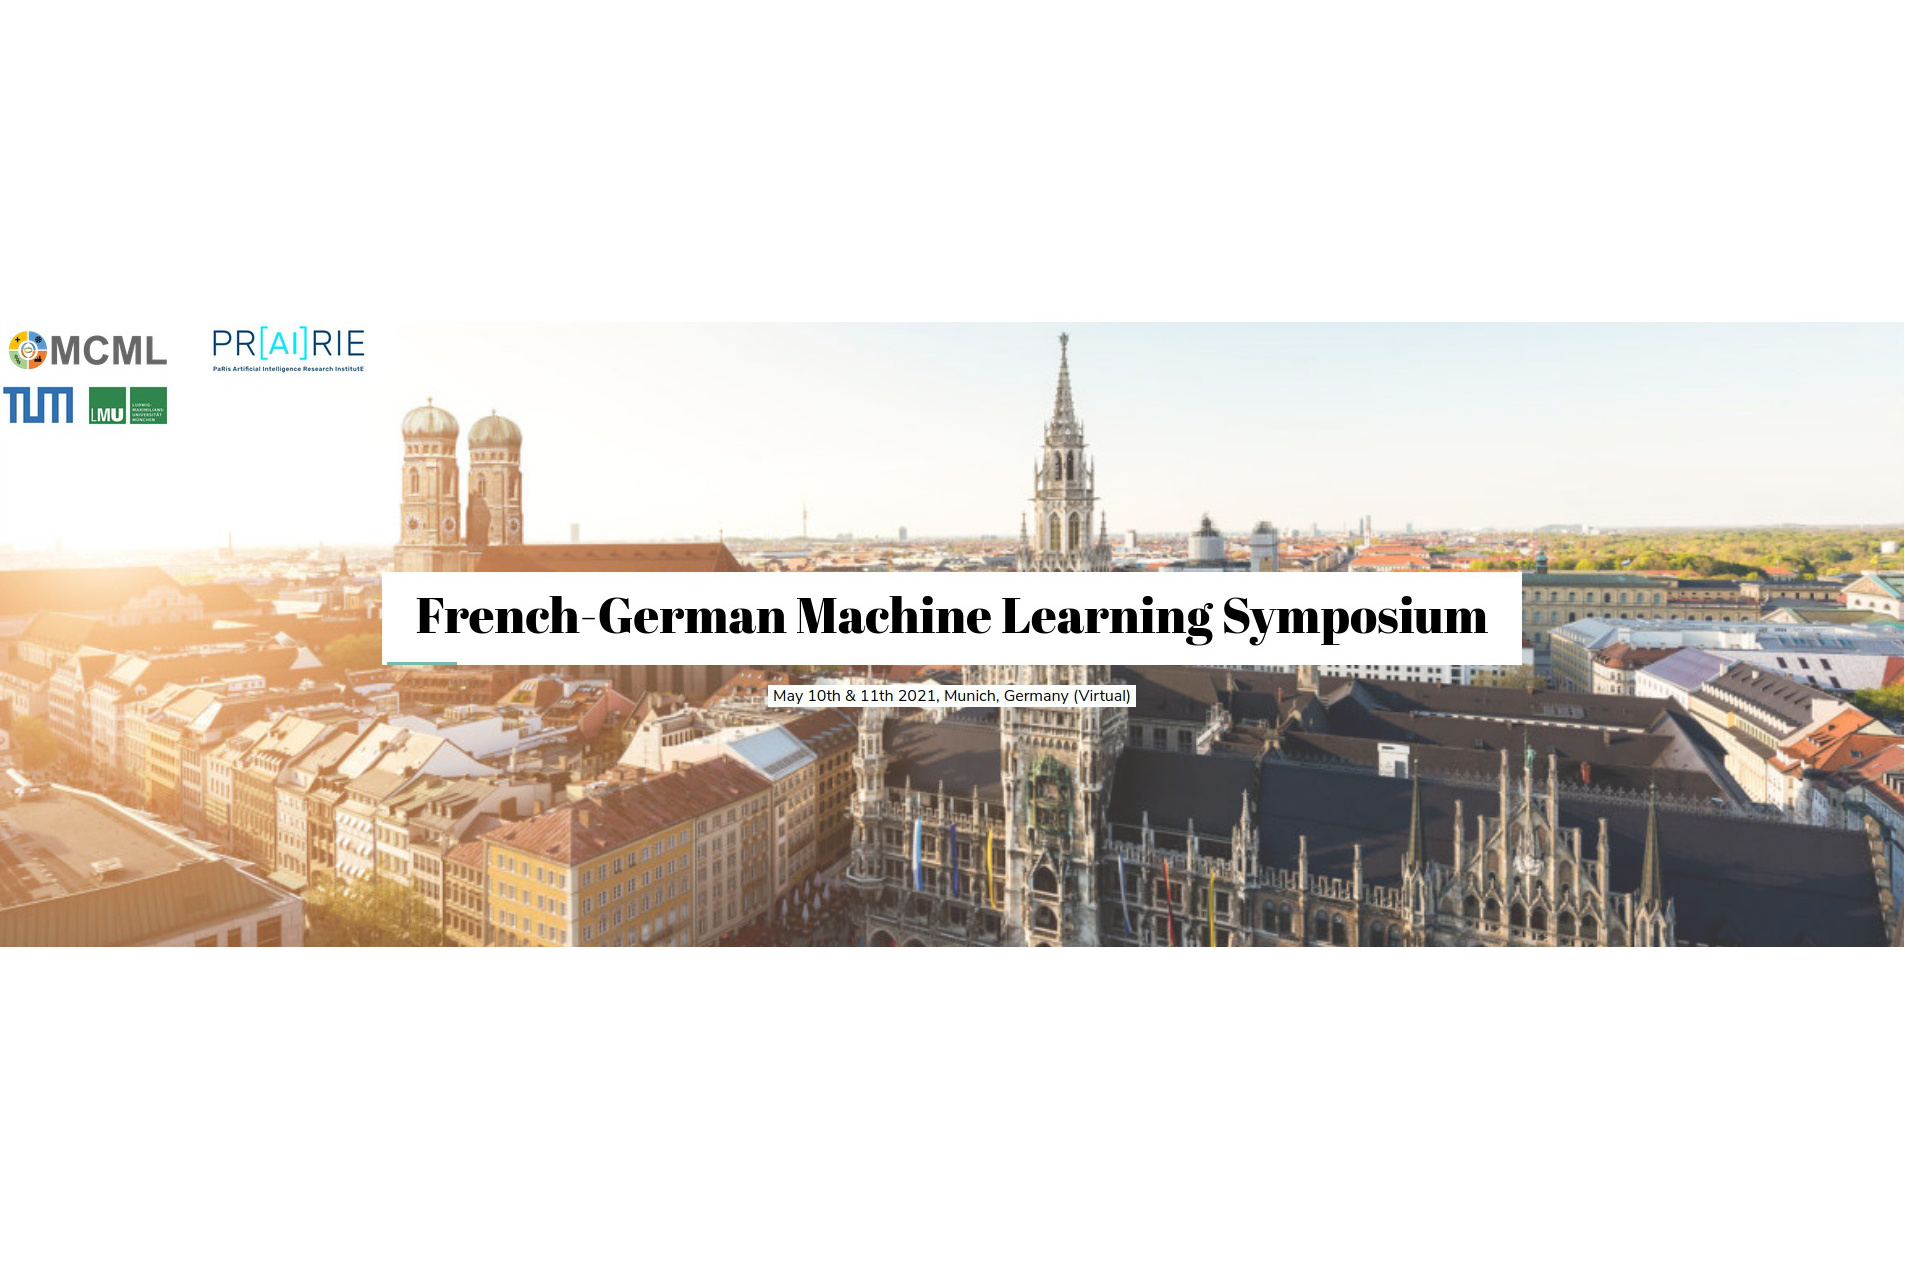 Teaser image to French-German Machine Learning Symposium